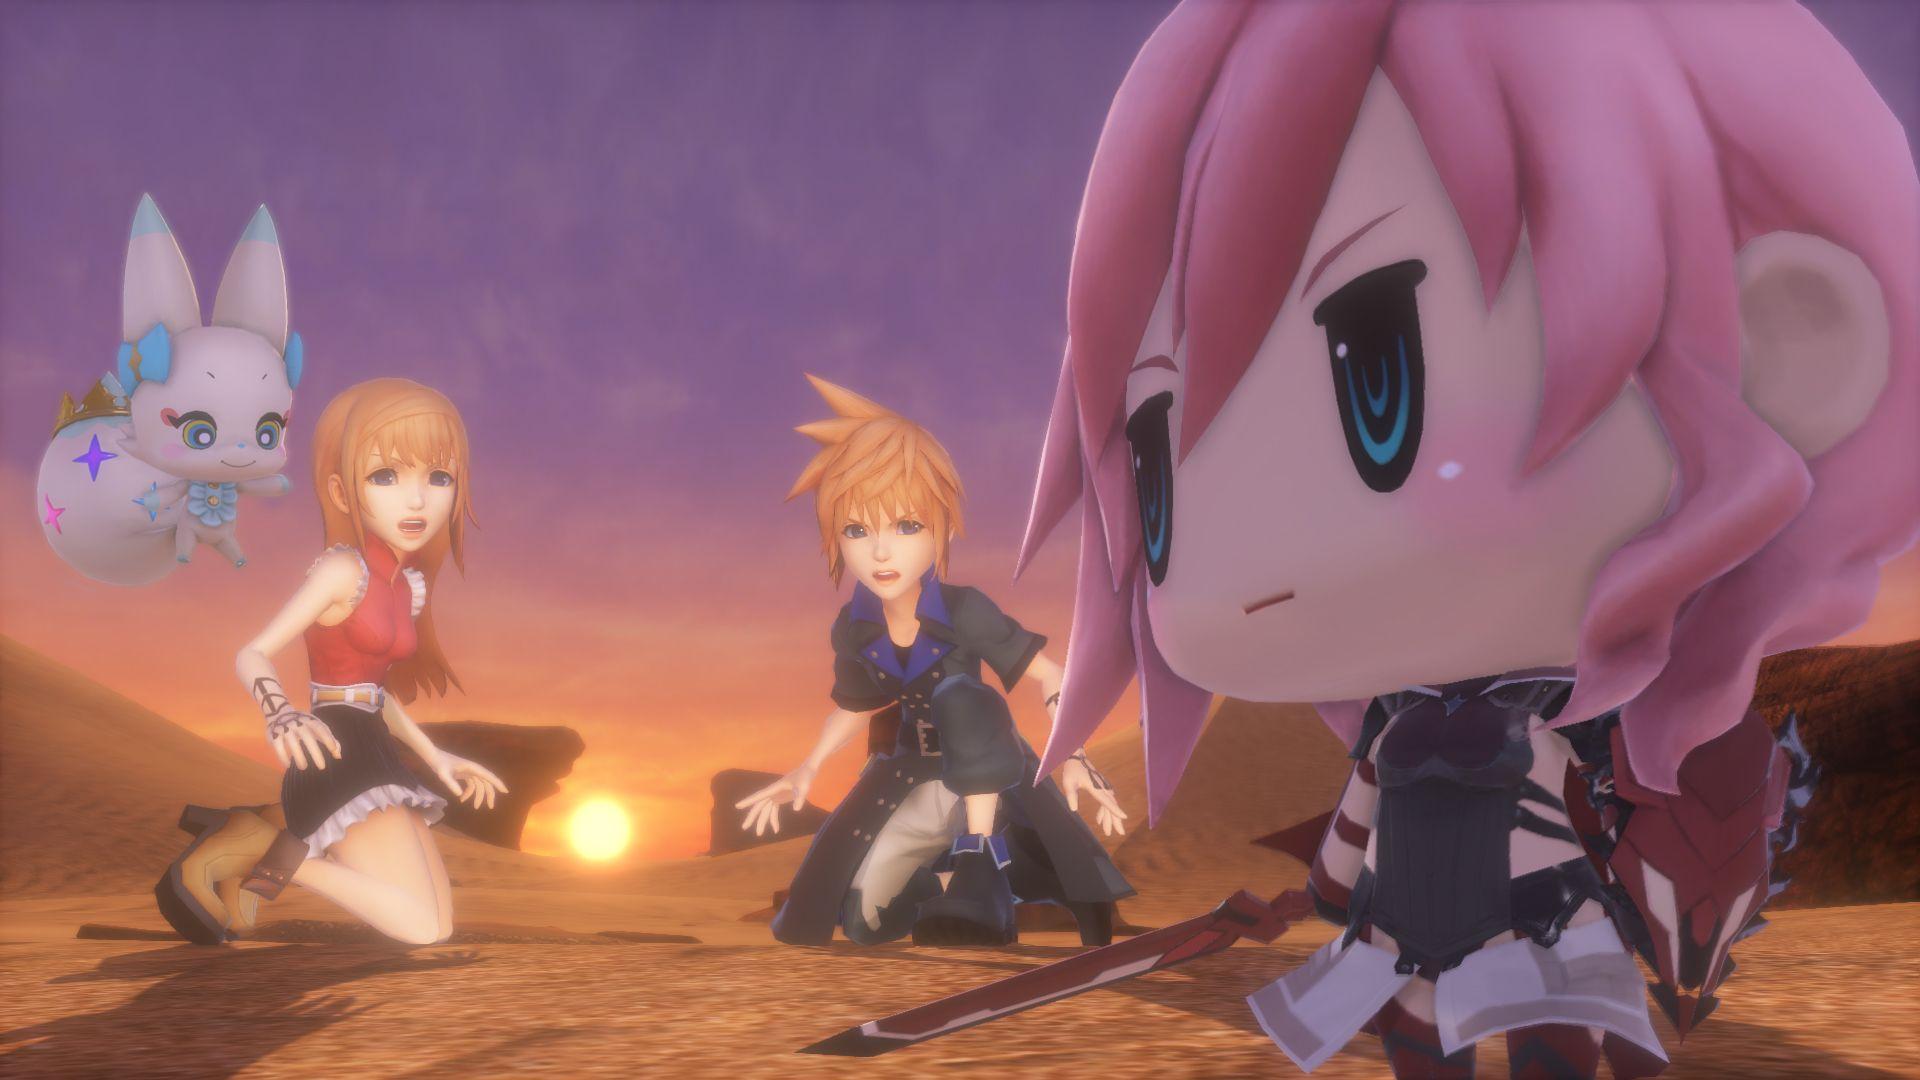 World of Final Fantasy was almost a completely different game